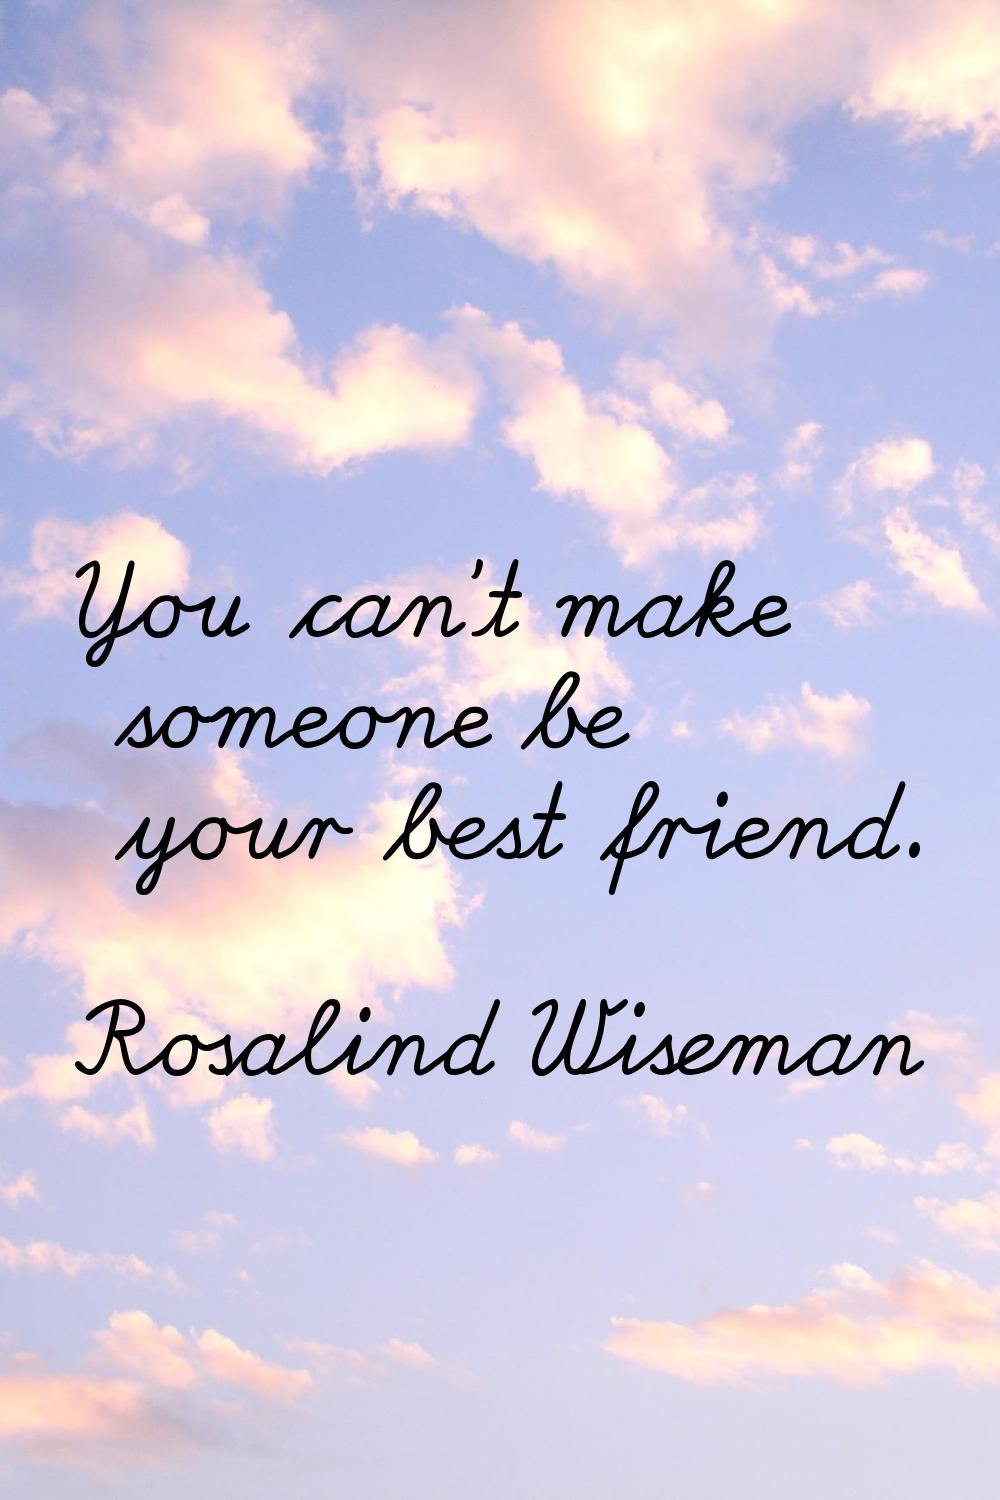 You can't make someone be your best friend.